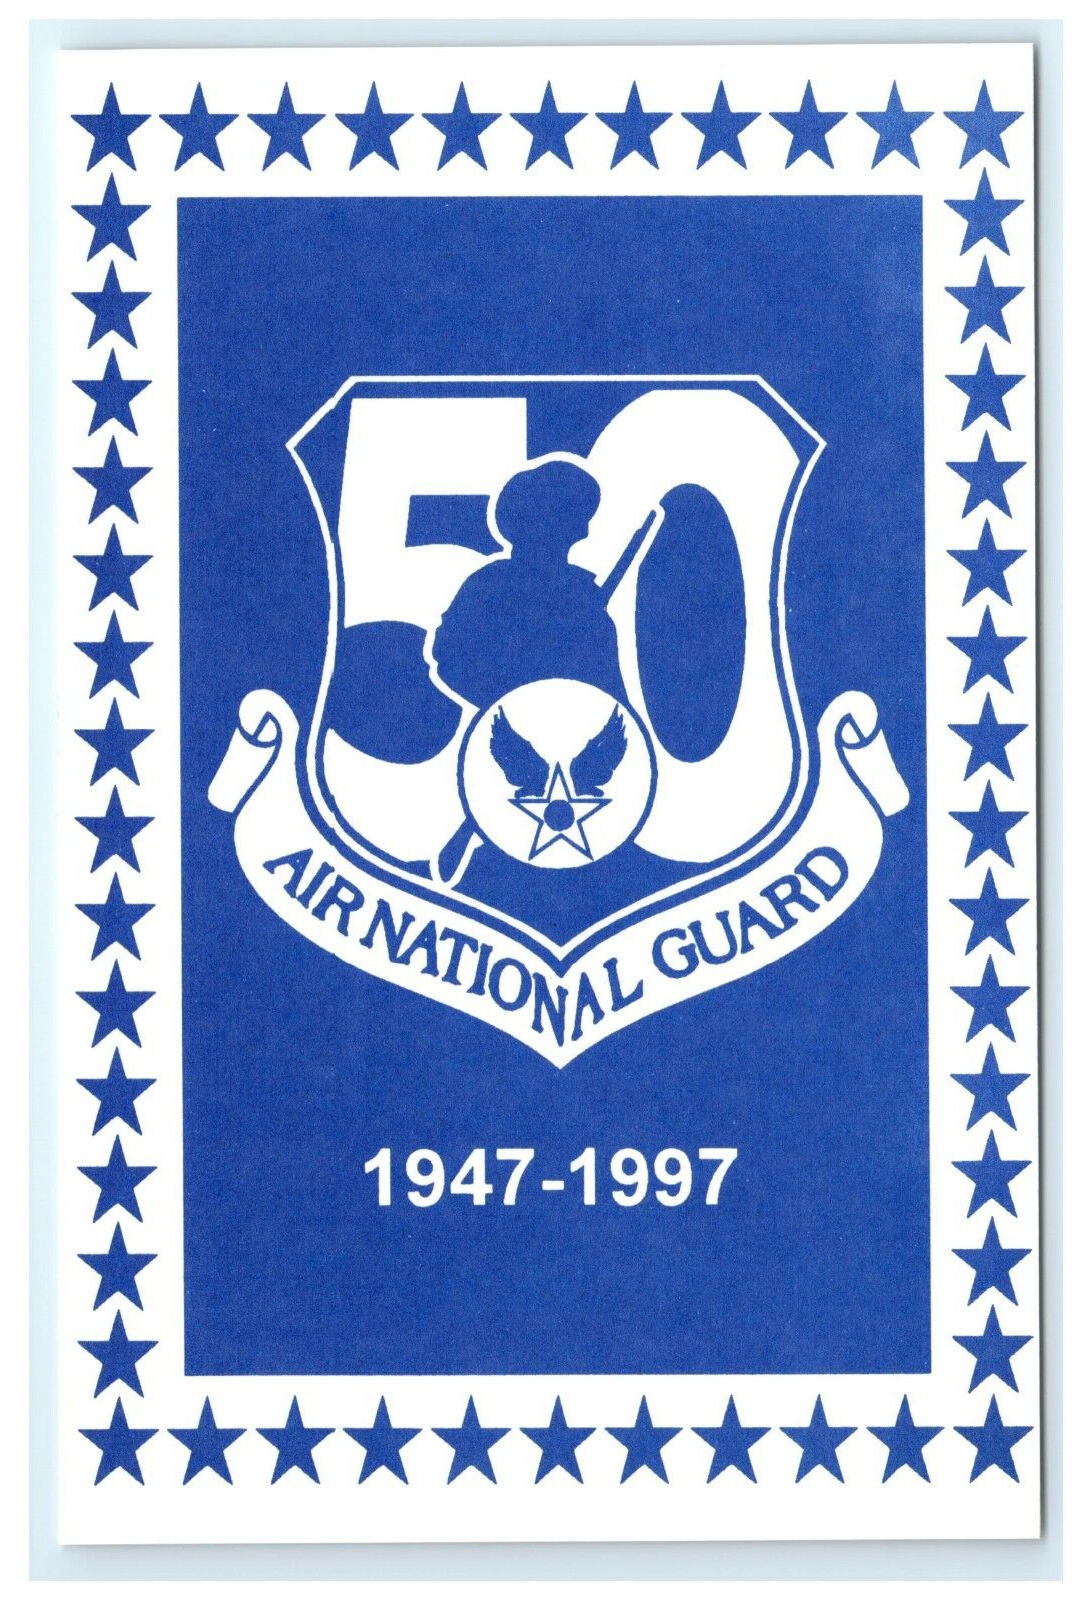 National Guard 50 Anniversary Commerative Postcard